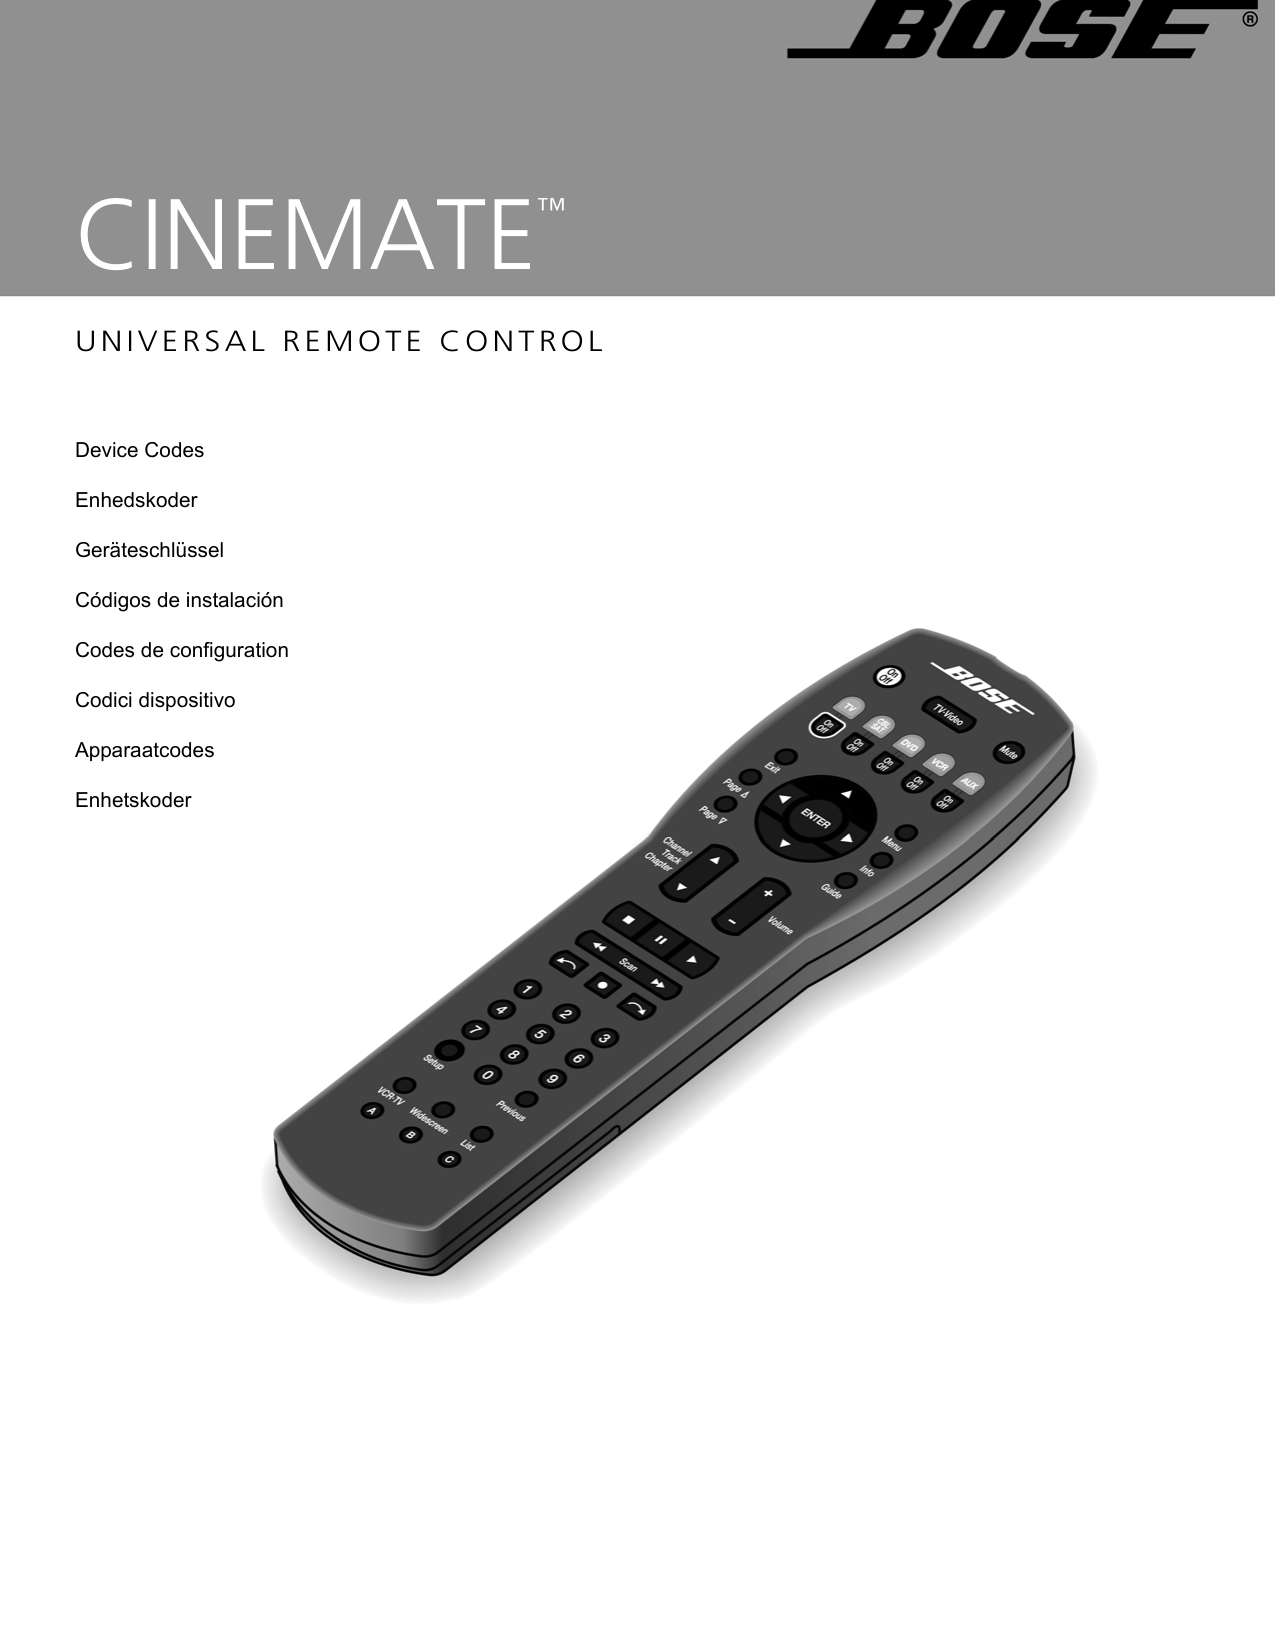 Ge universal remote codes for bose